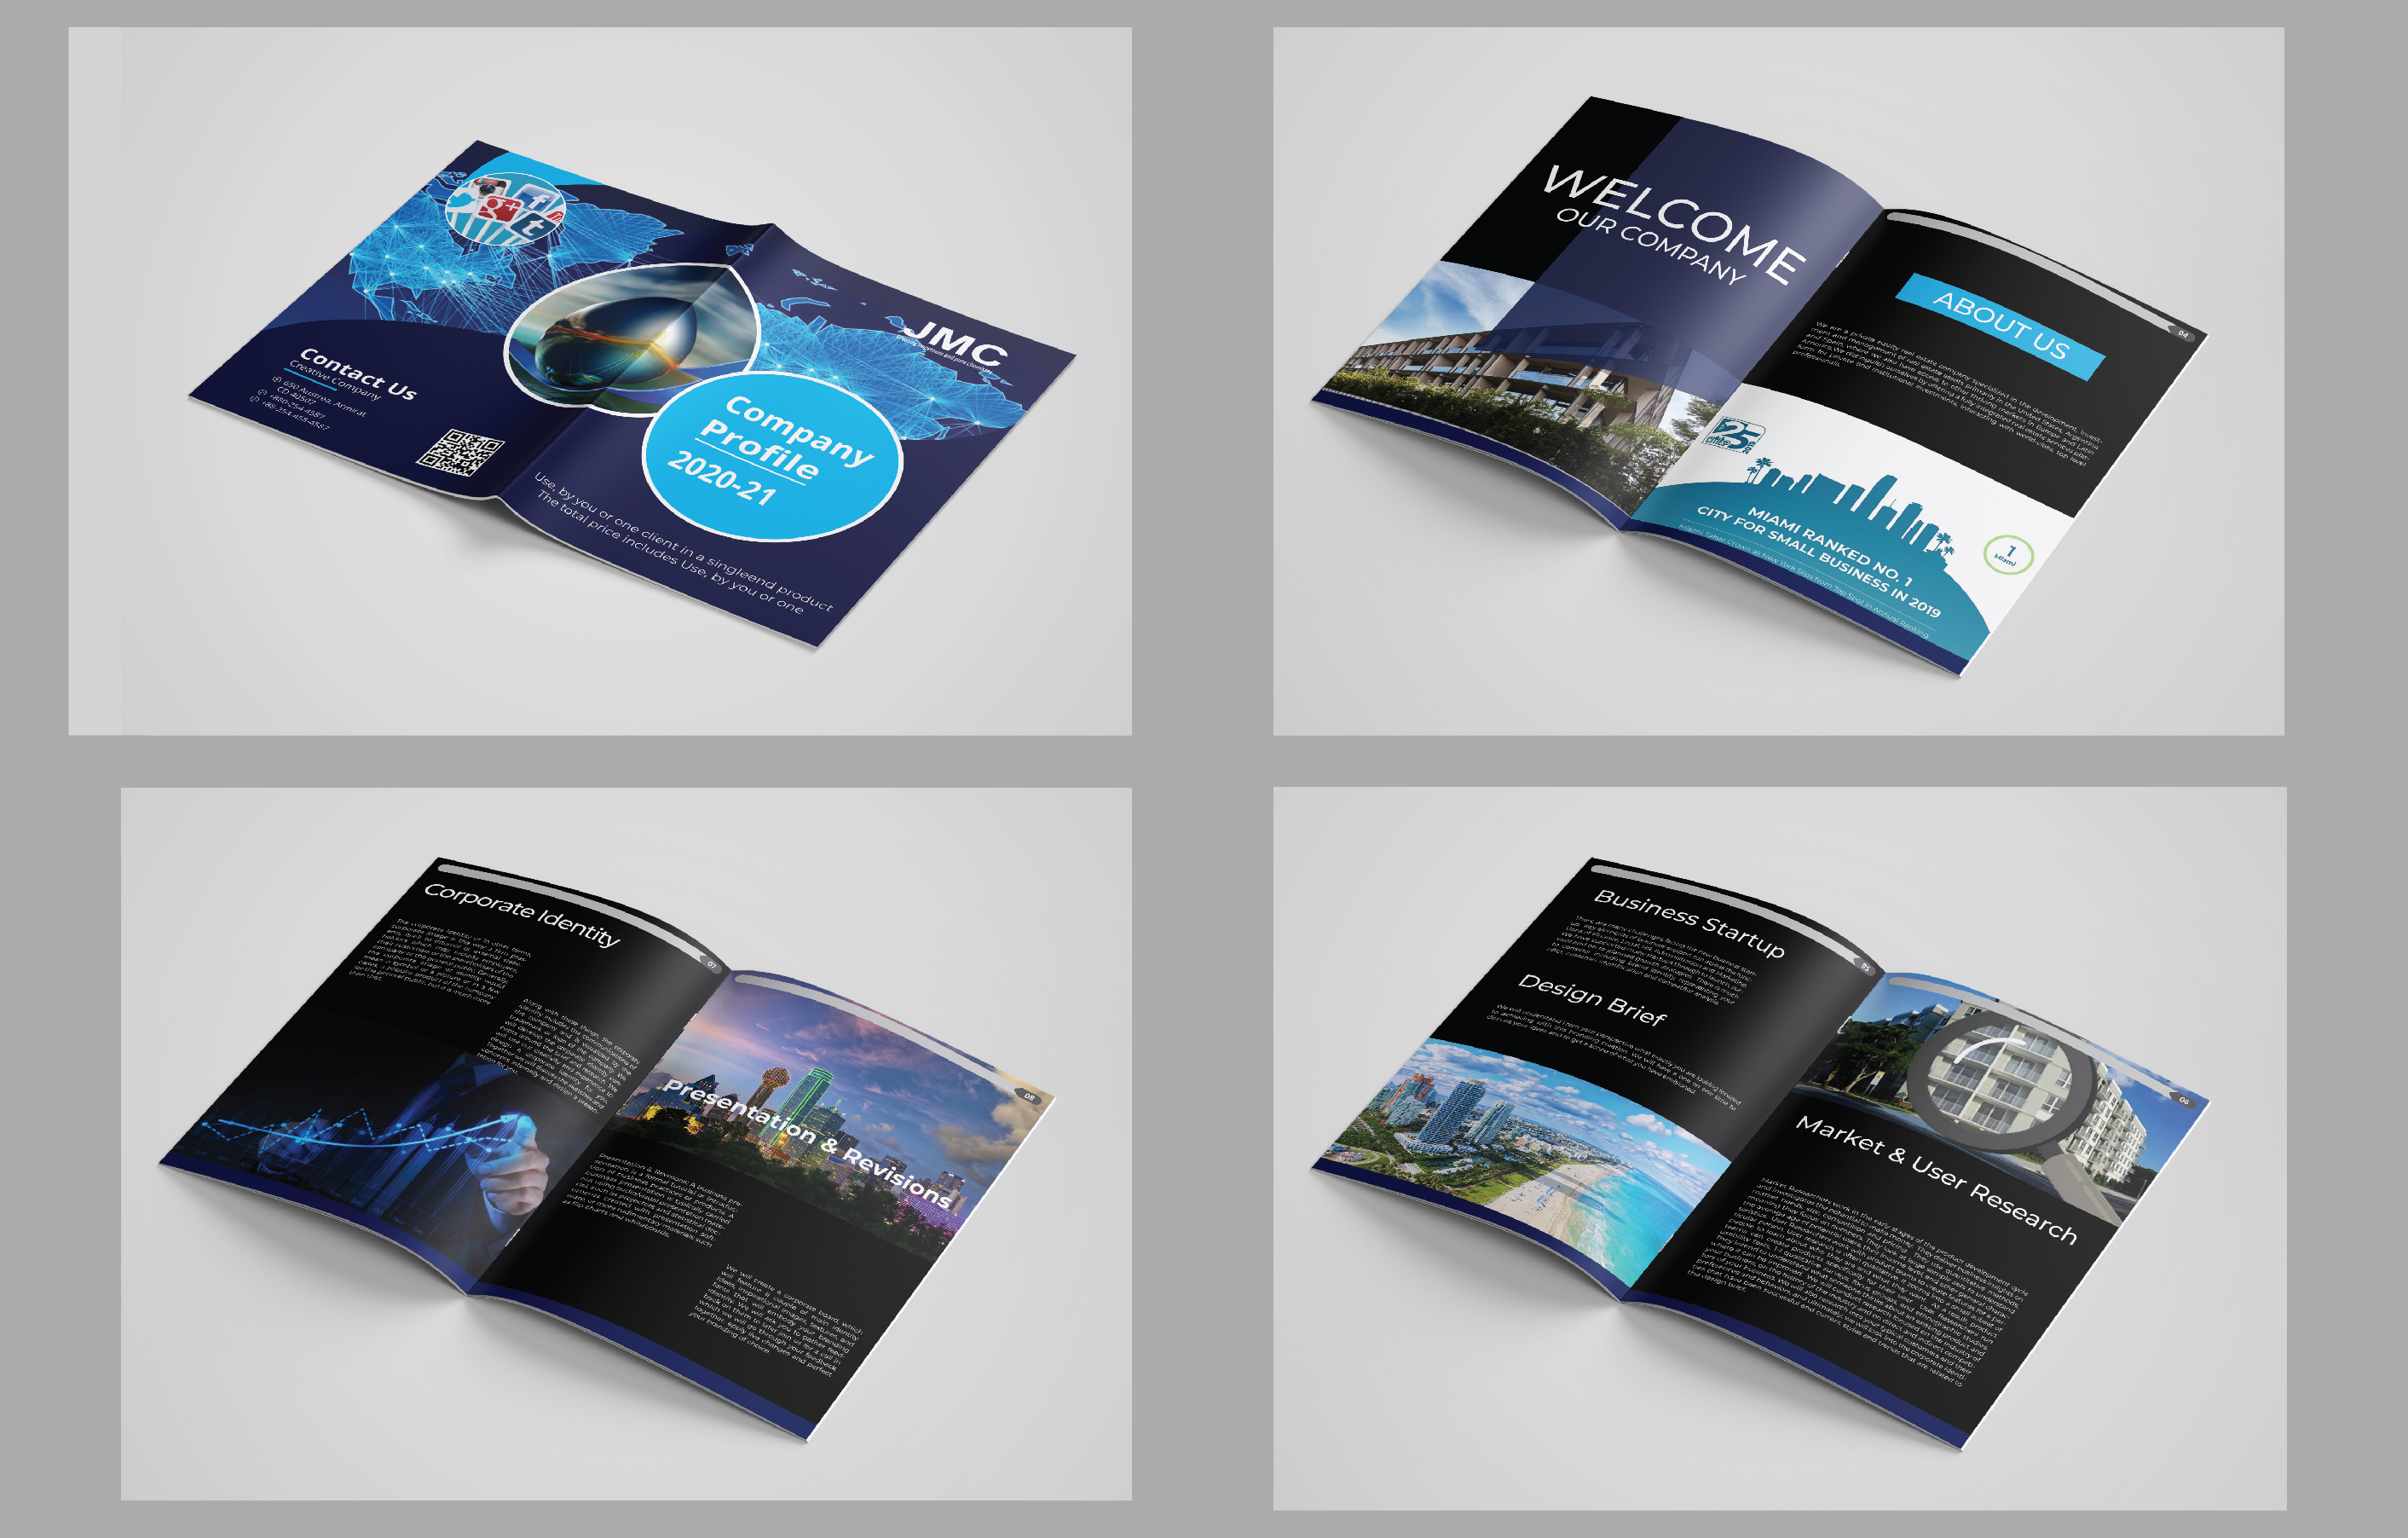 I Will Design Company Brochure or Business Catalog with my creativity.